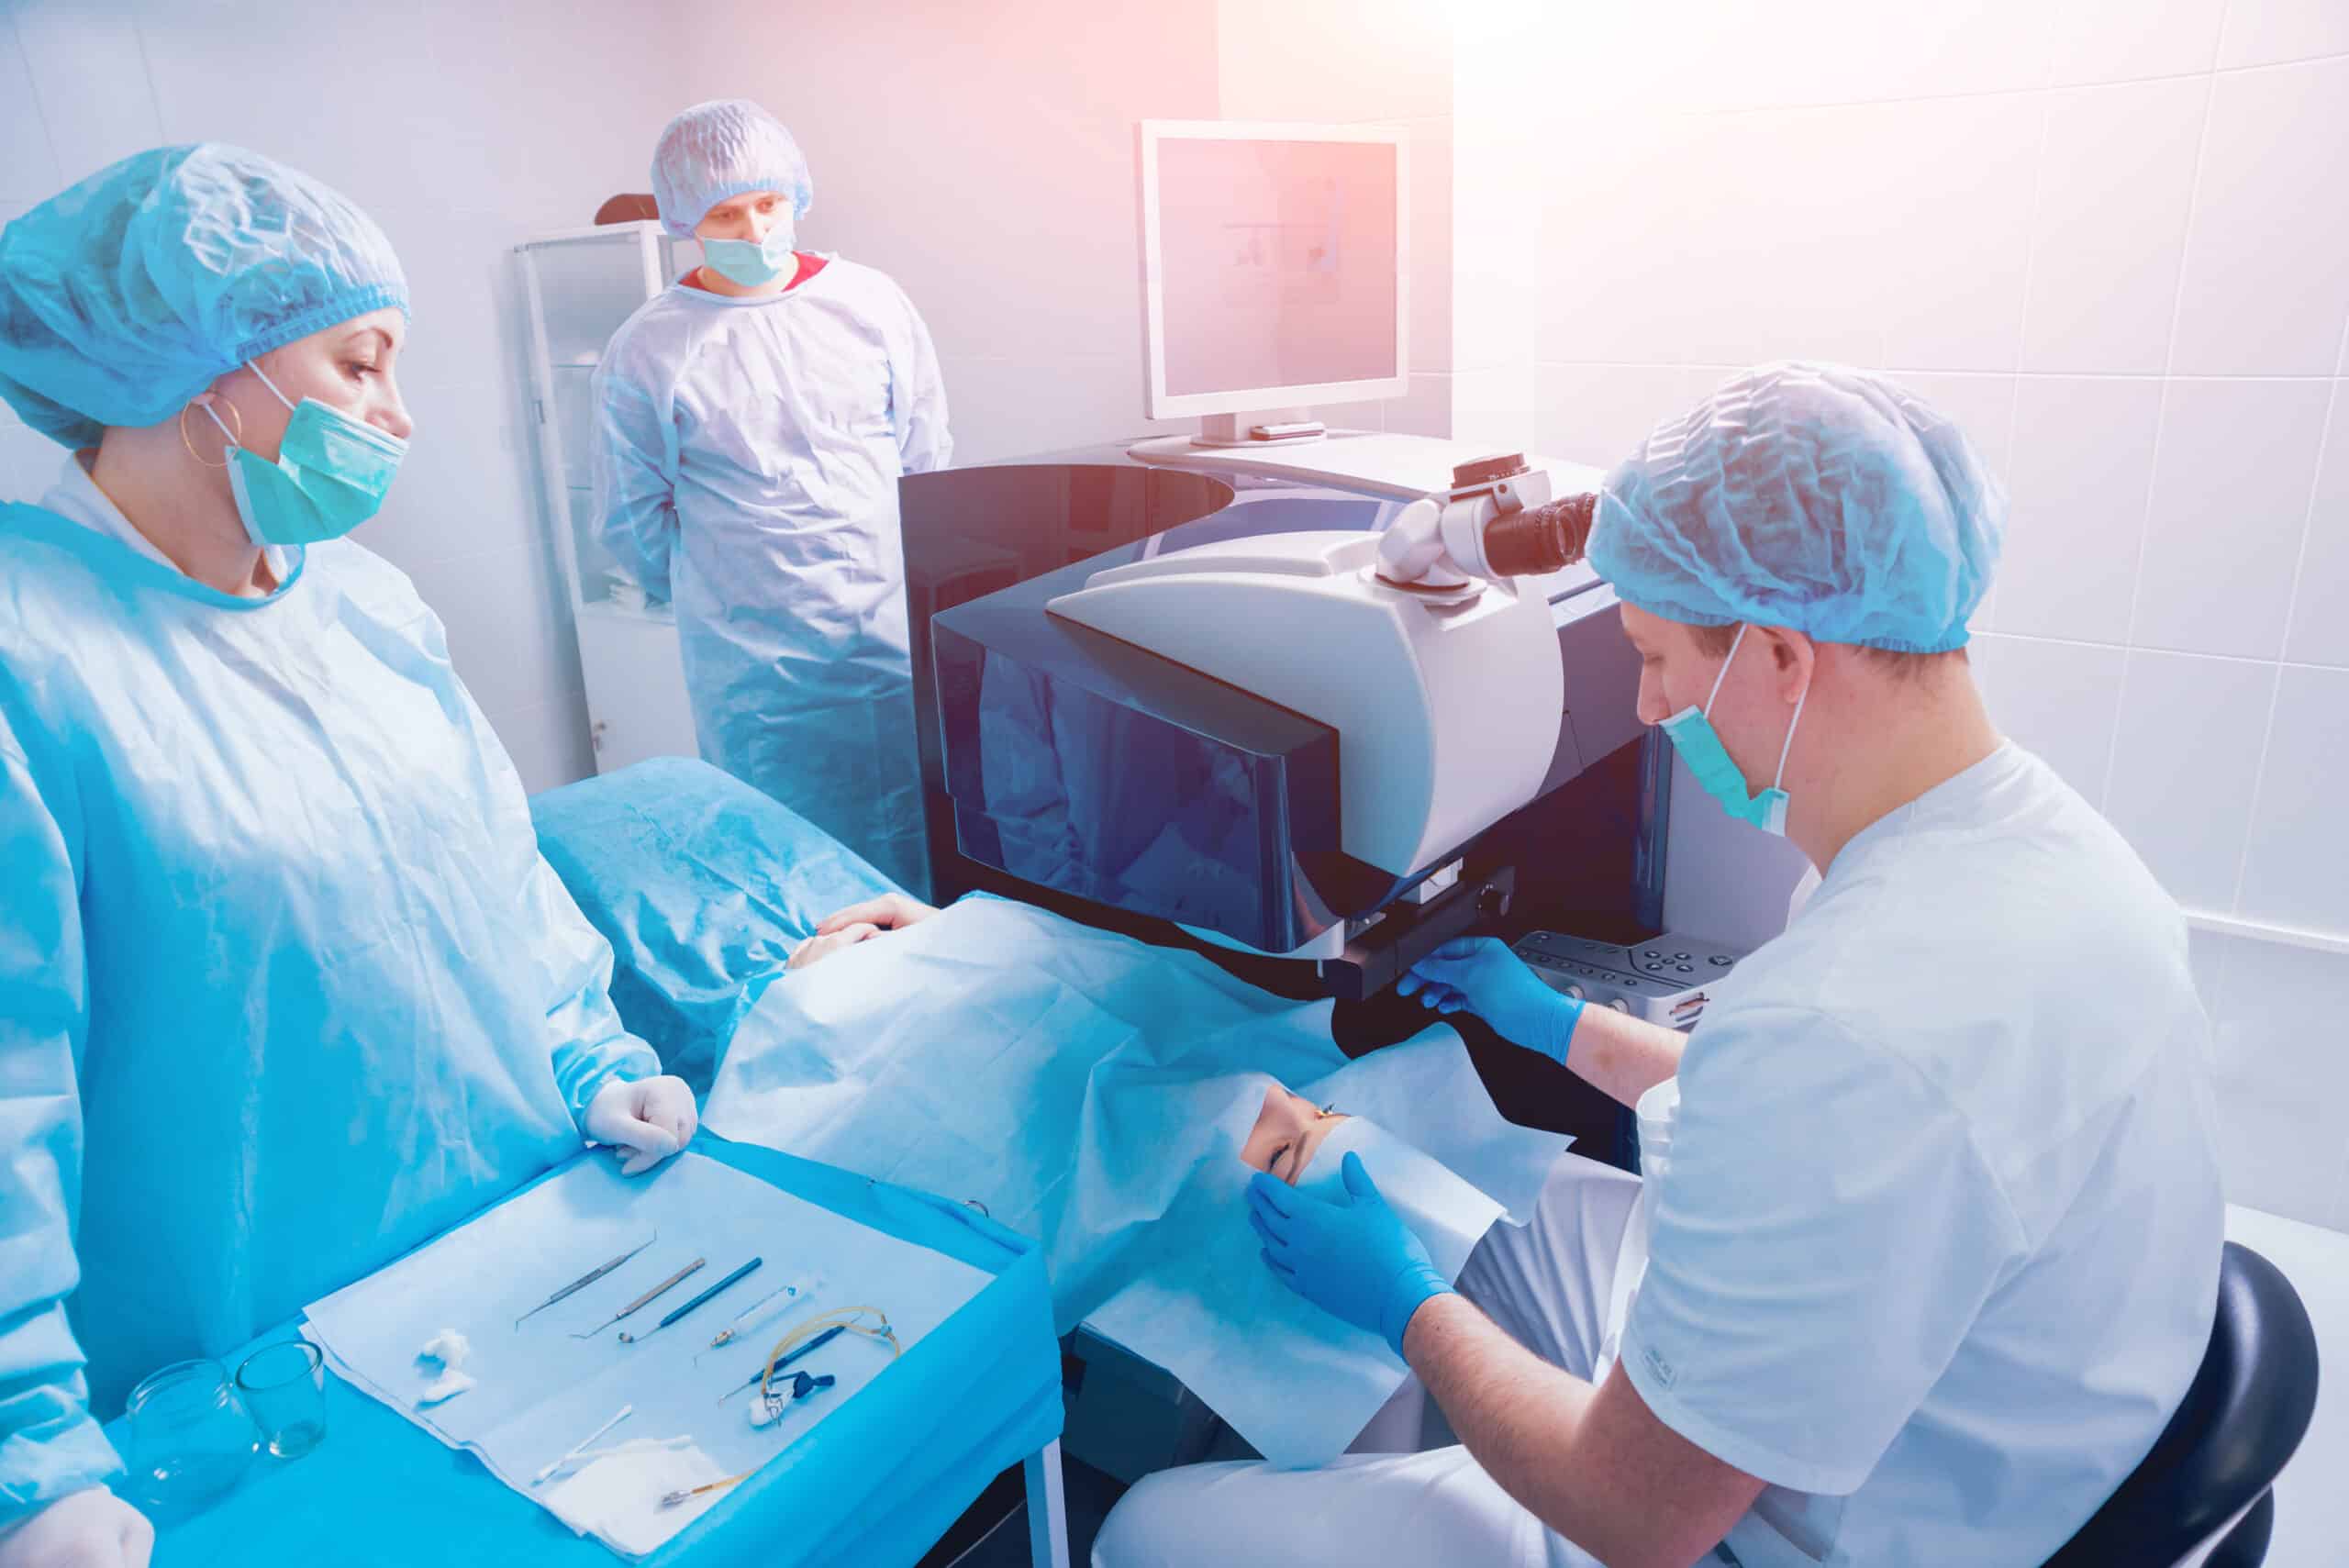 Medical professionals performing eye surgery